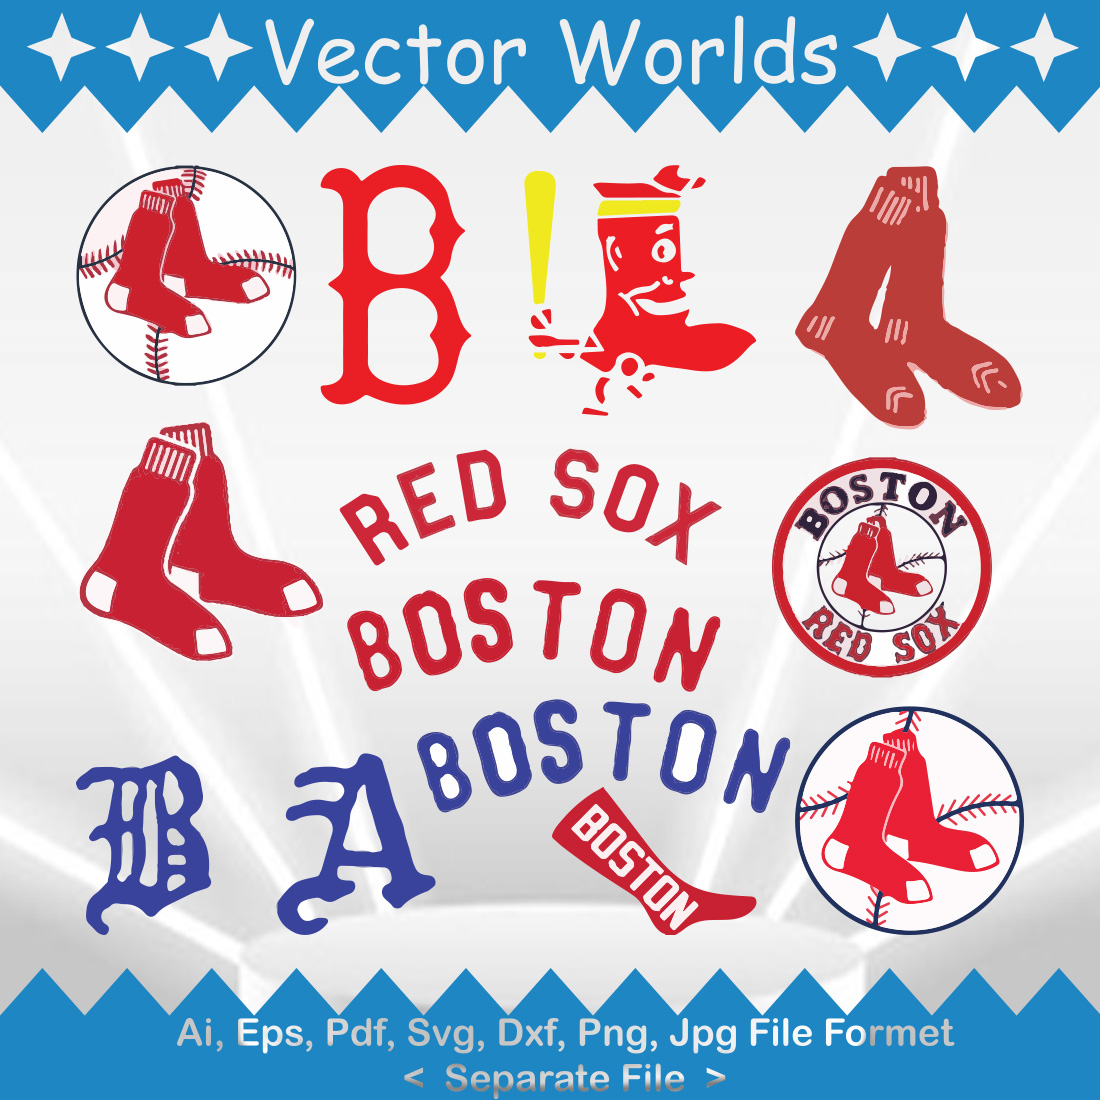 Boston Red Sox SVG Vector Design cover image.